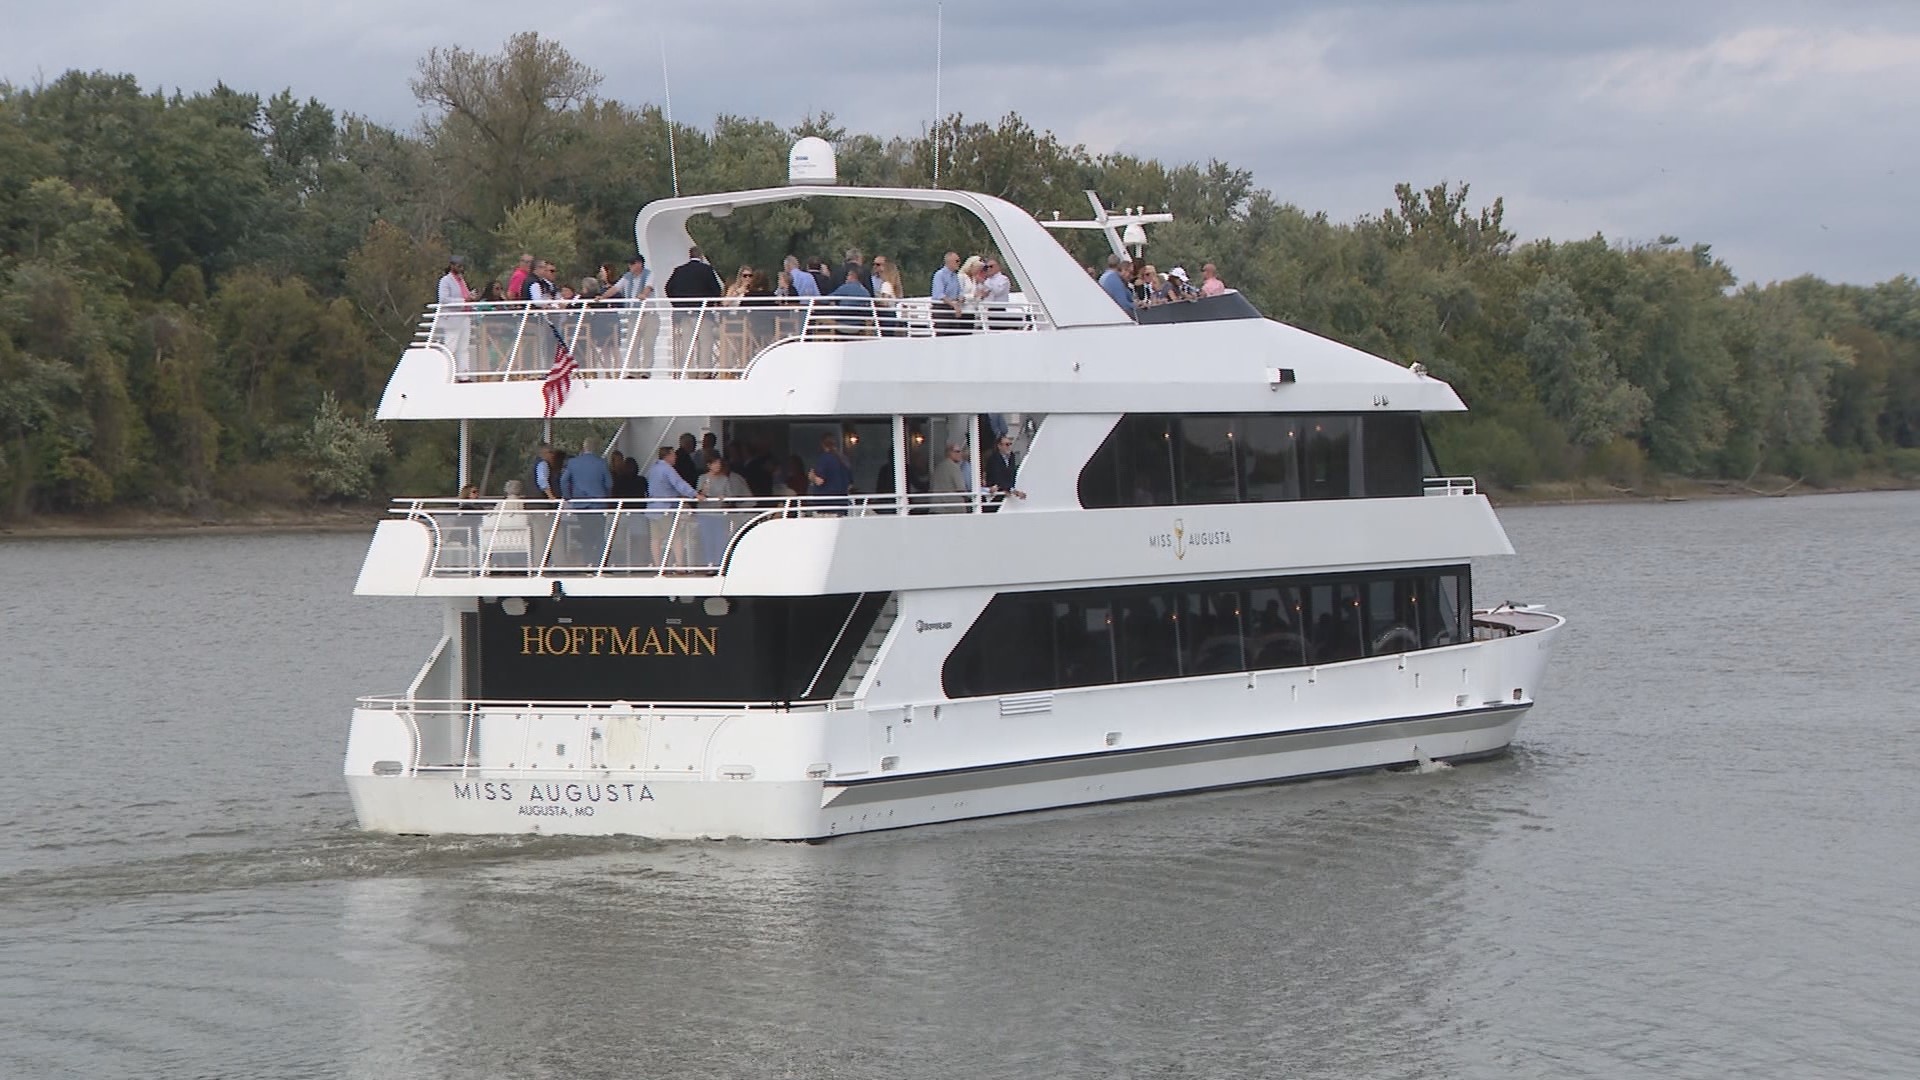 Fall colors are at their peak, which makes this the perfect time to enjoy the newest river attraction.
Photojournalist Randy Schwentker introduces us to Miss Augusta